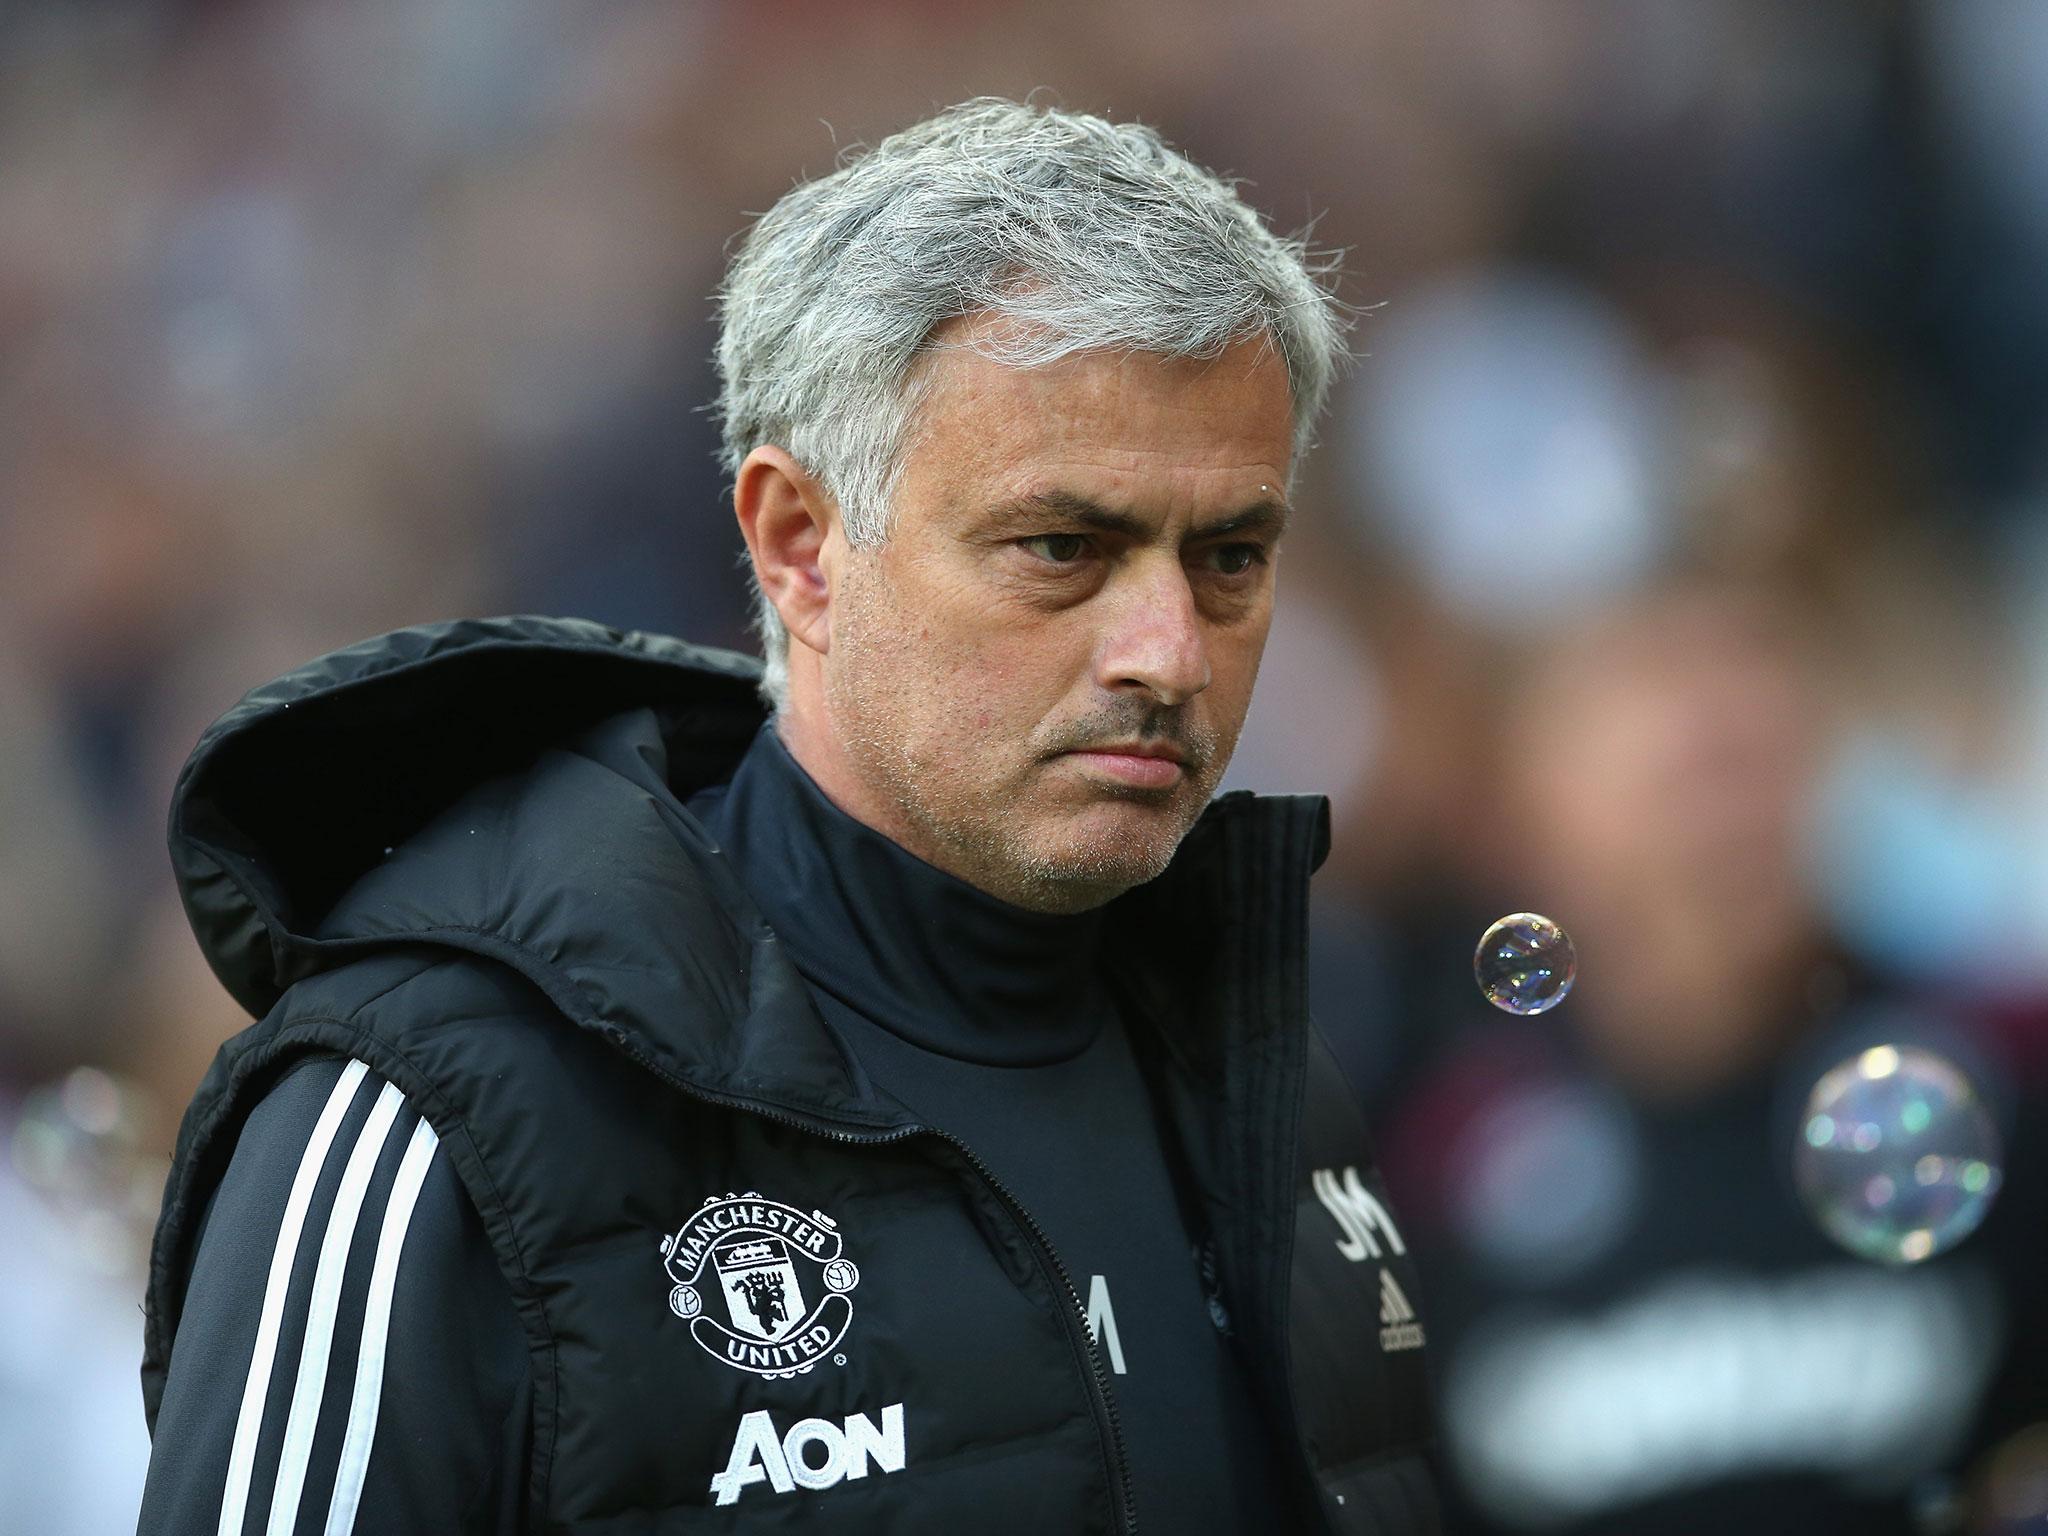 Mourinho watched his side earn a point to secure second place